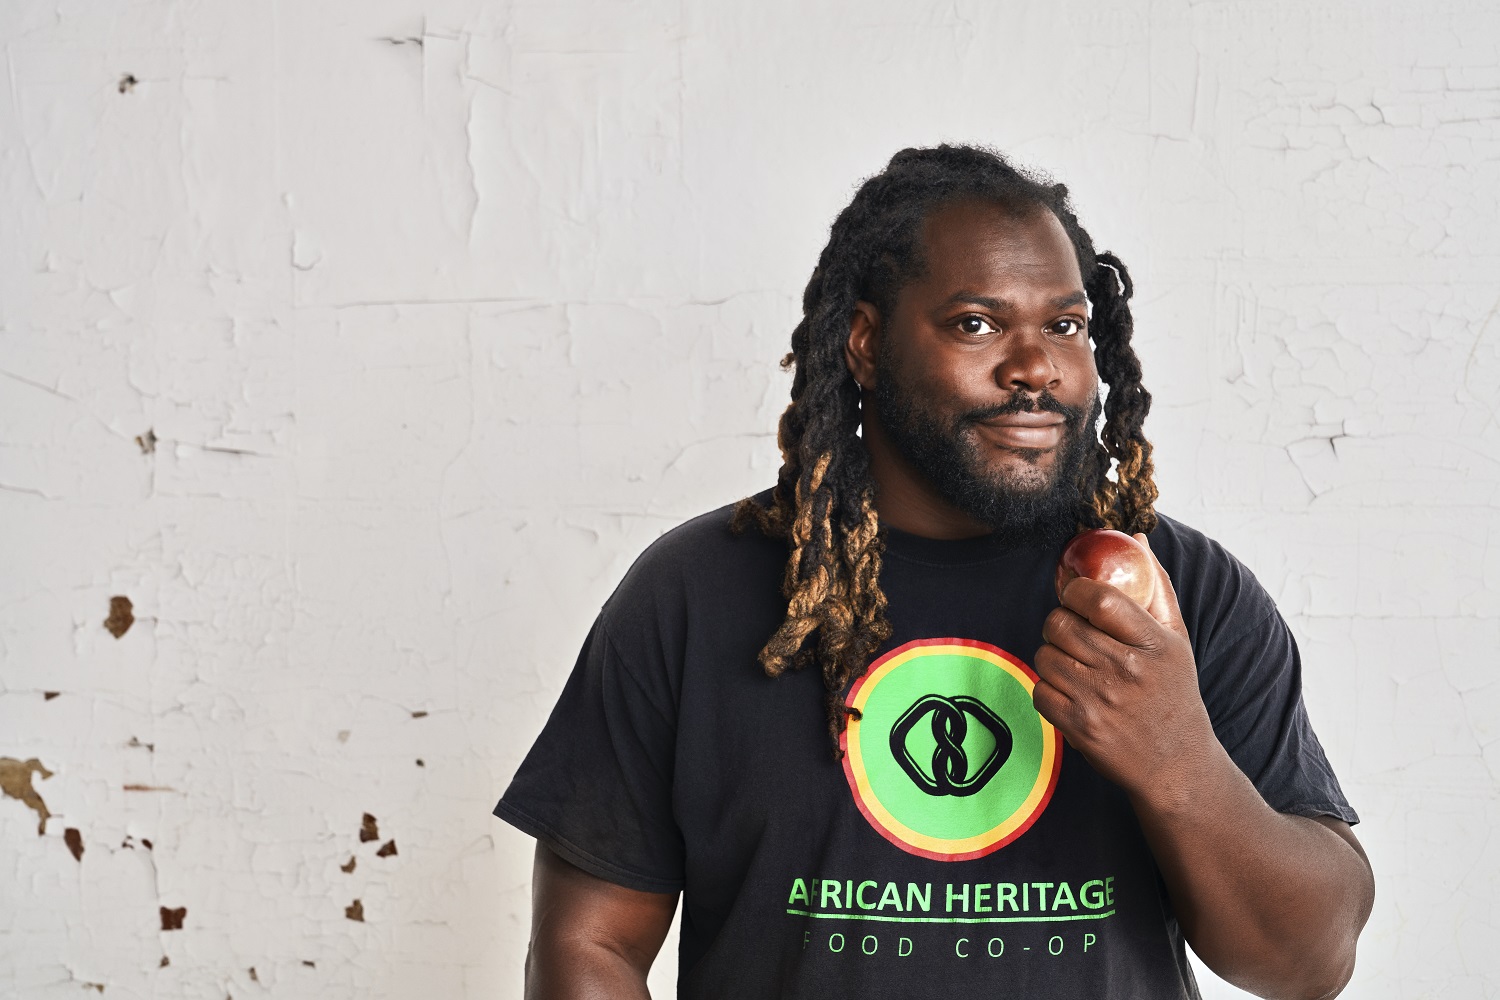 Alex Wright of the African Heritage Food Co-op